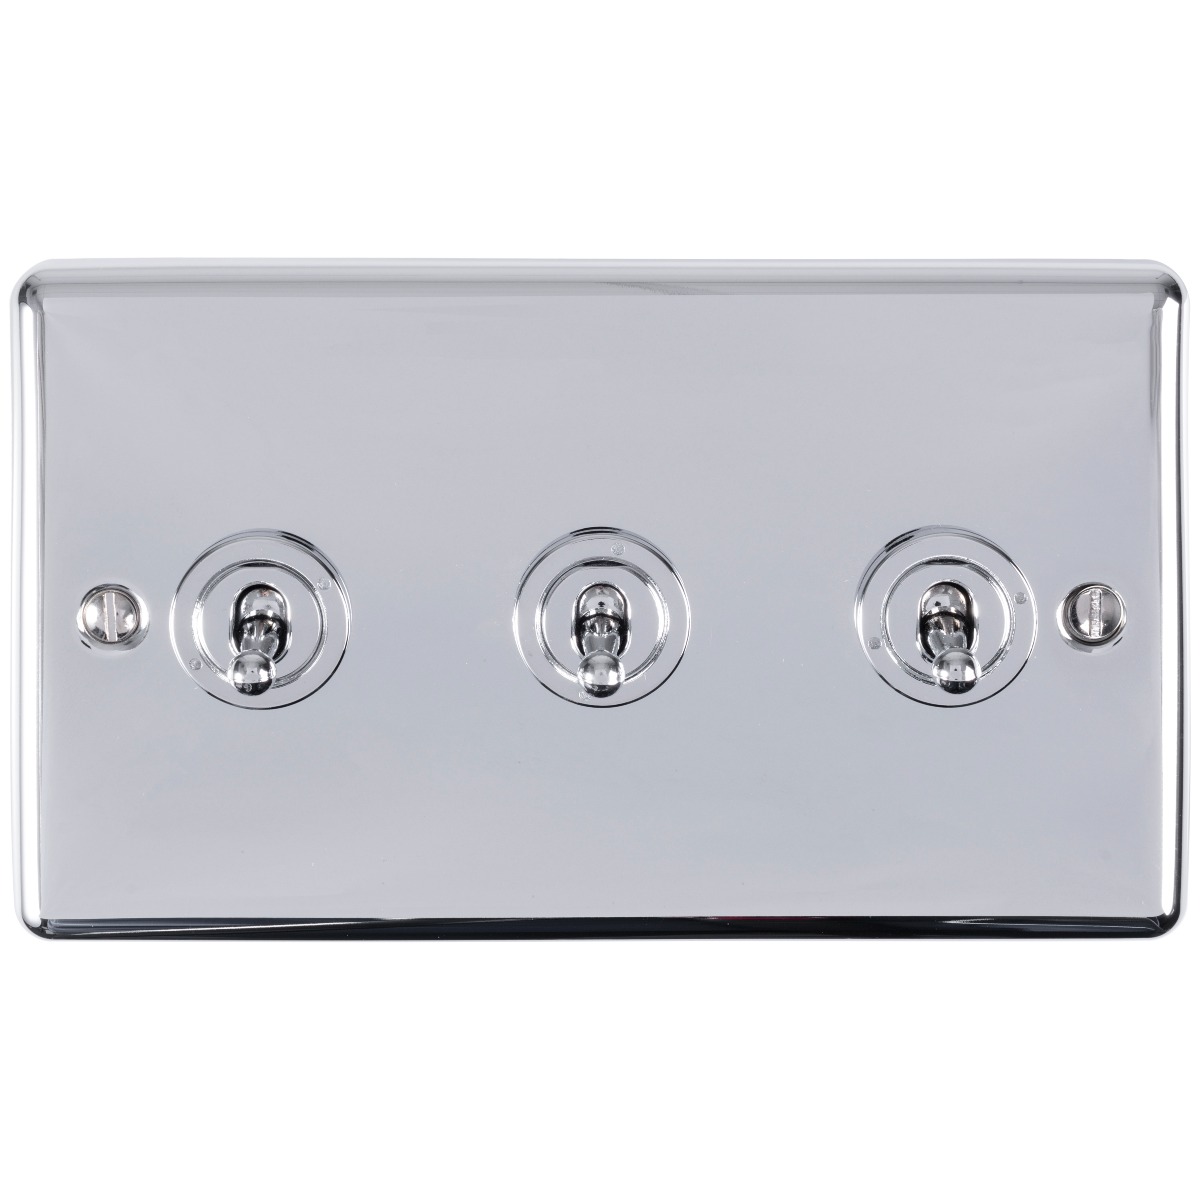 Eurolite Ssst3Sw 3 Gang 10Amp 2Way Toggle Switch Round Edge Satin Stainless Steel Plate